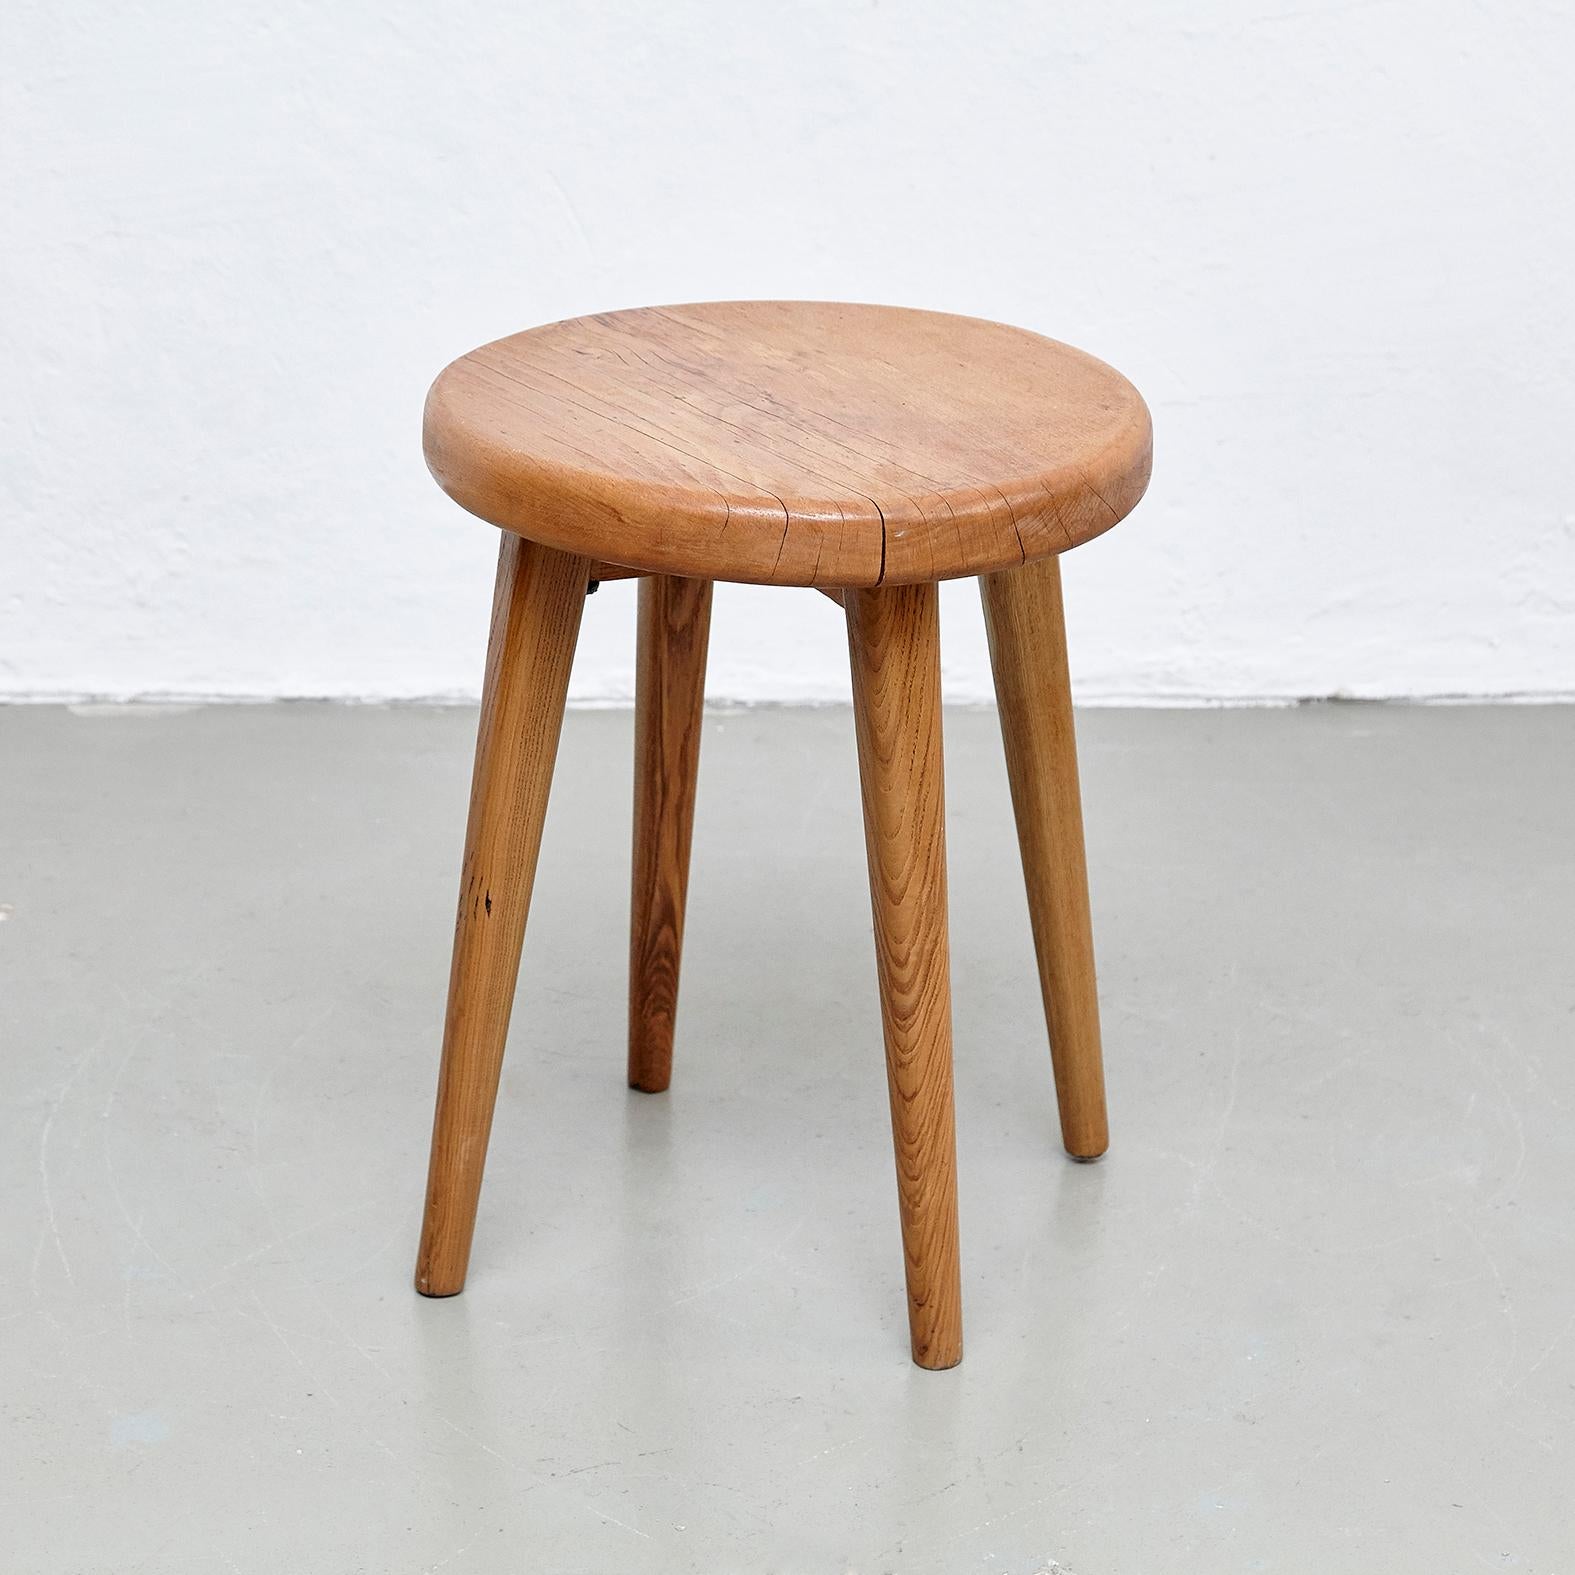 Mid-20th Century After Pierre Jeanneret, Mid Century Modern, Wood French Side Table, circa 1960